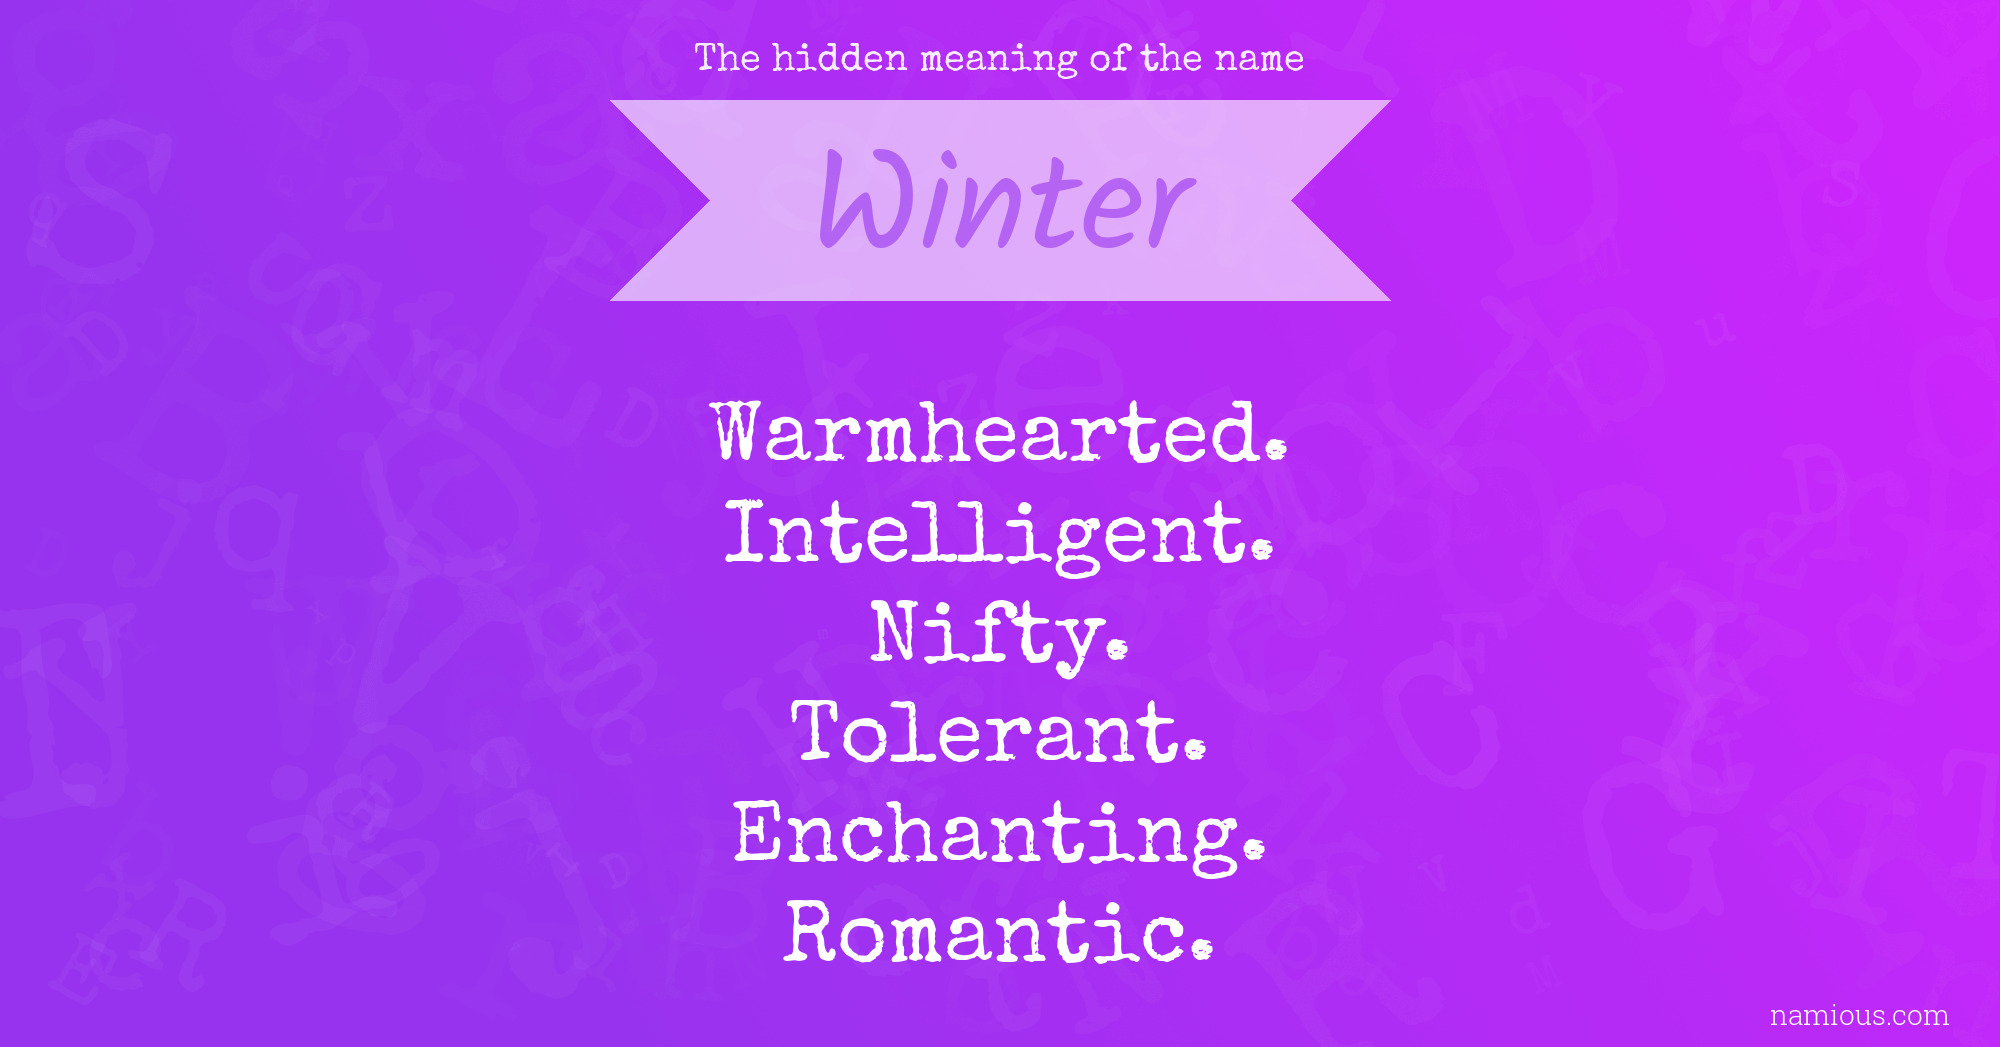 The hidden meaning of the name Winter